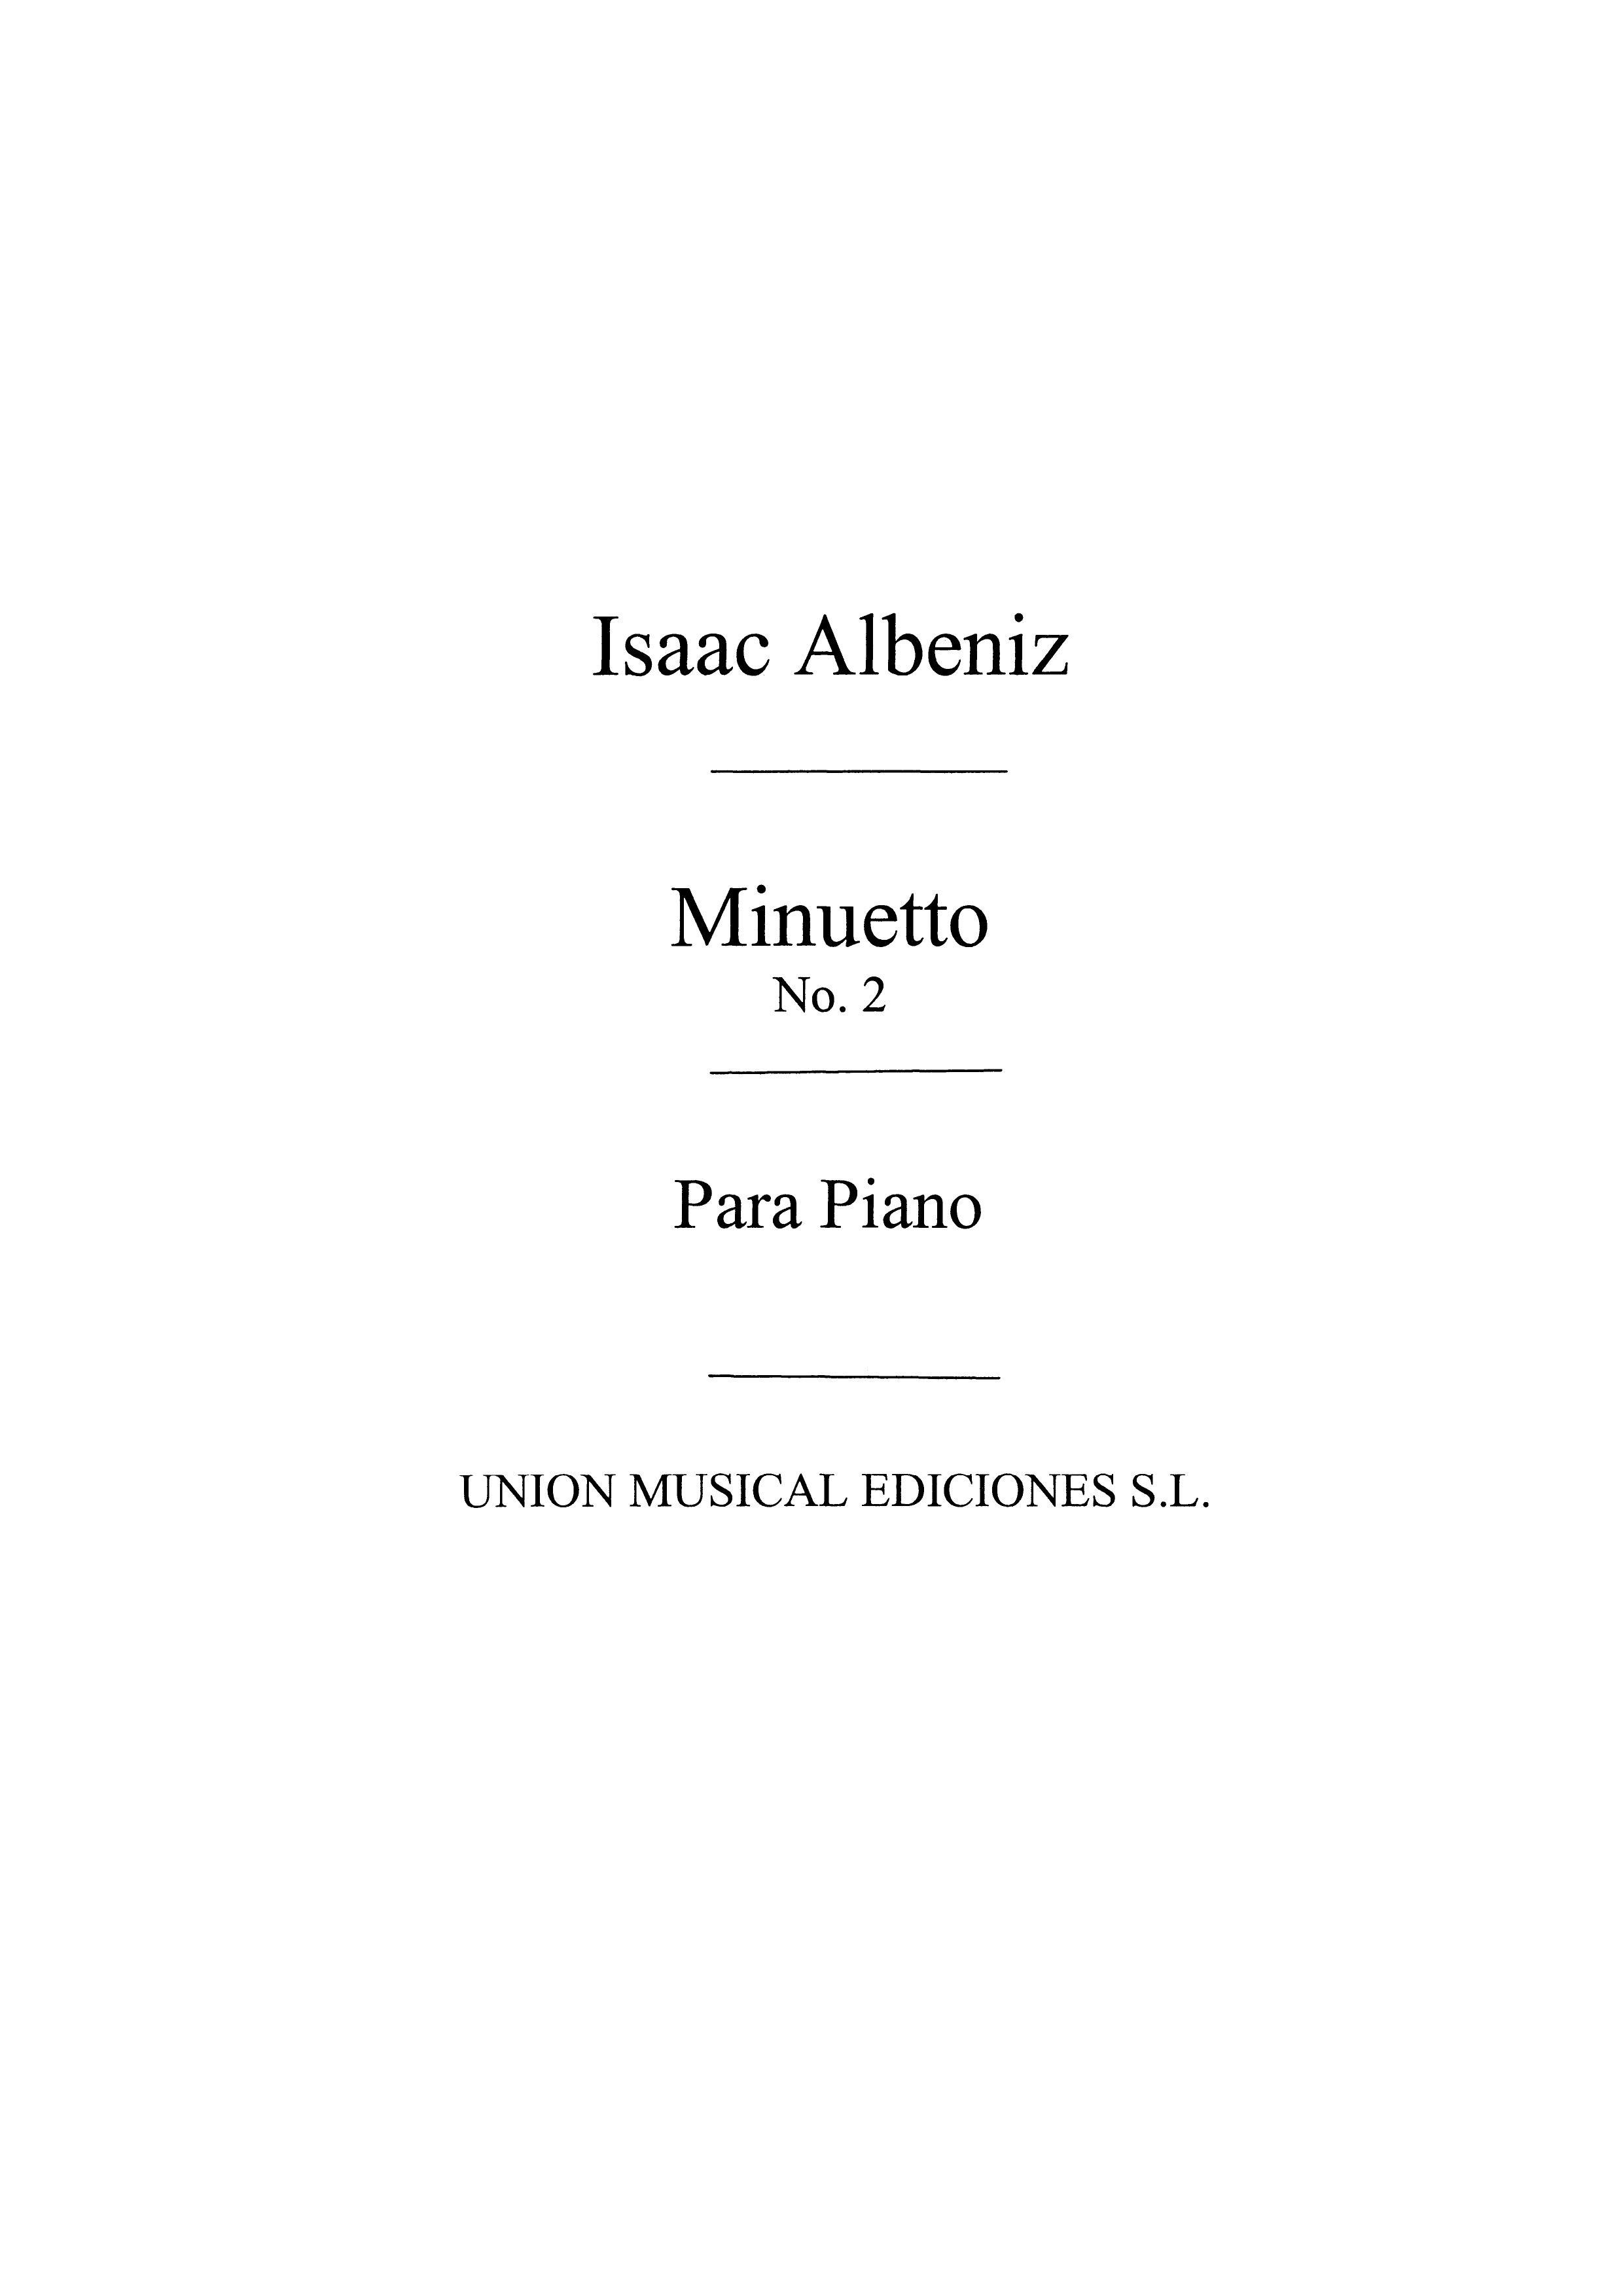 Isaac Albniz: Minueto No.2 From Suite Ancienne Op.54 For Piano: Piano: